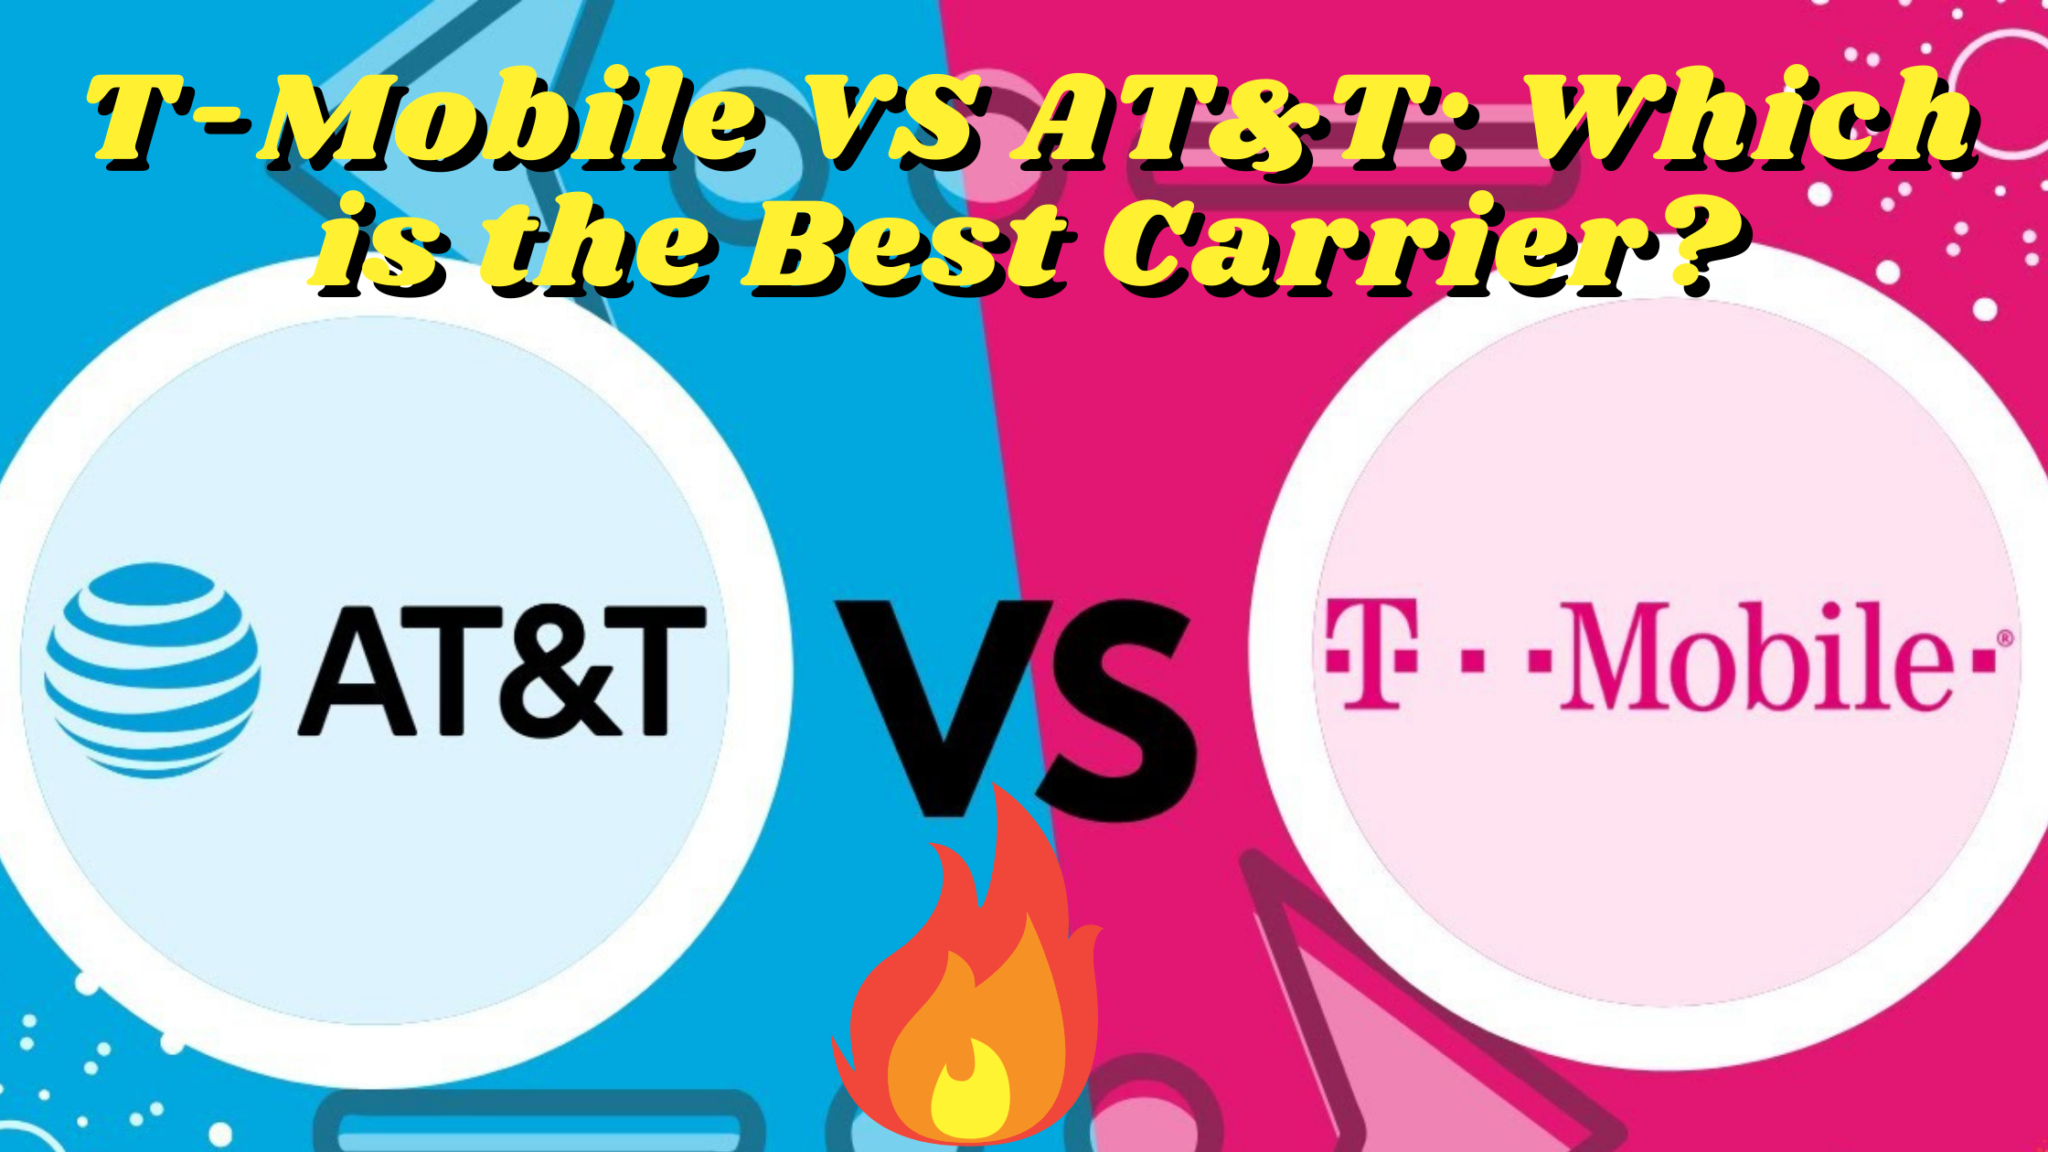 TMobile VS AT&T Which is the Best Carrier? Reliable platform for